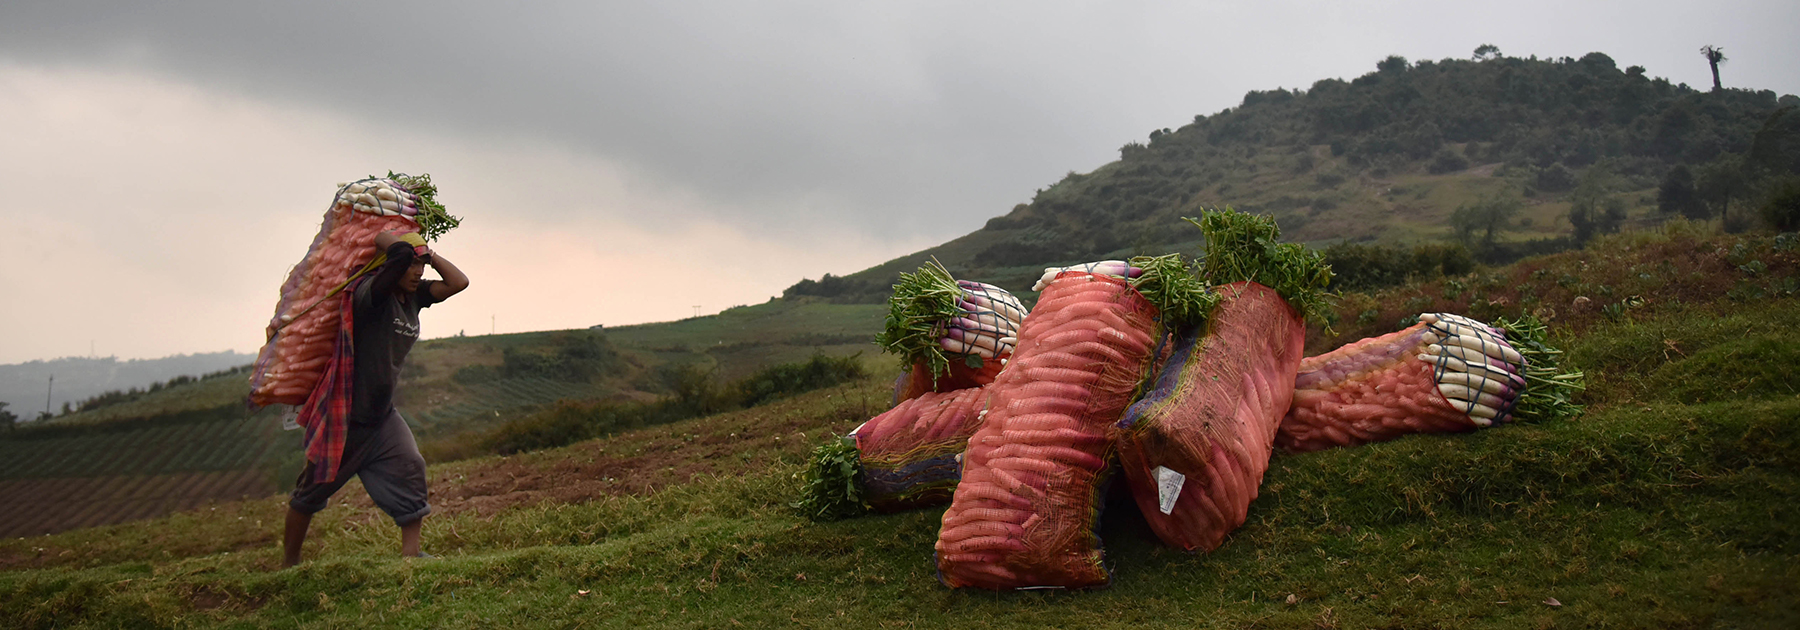  Khasi farmer carries a bag of radish for sale after picking from fields on the outskirts of Shillong. (BIJU BORO/AFP/Getty Images)